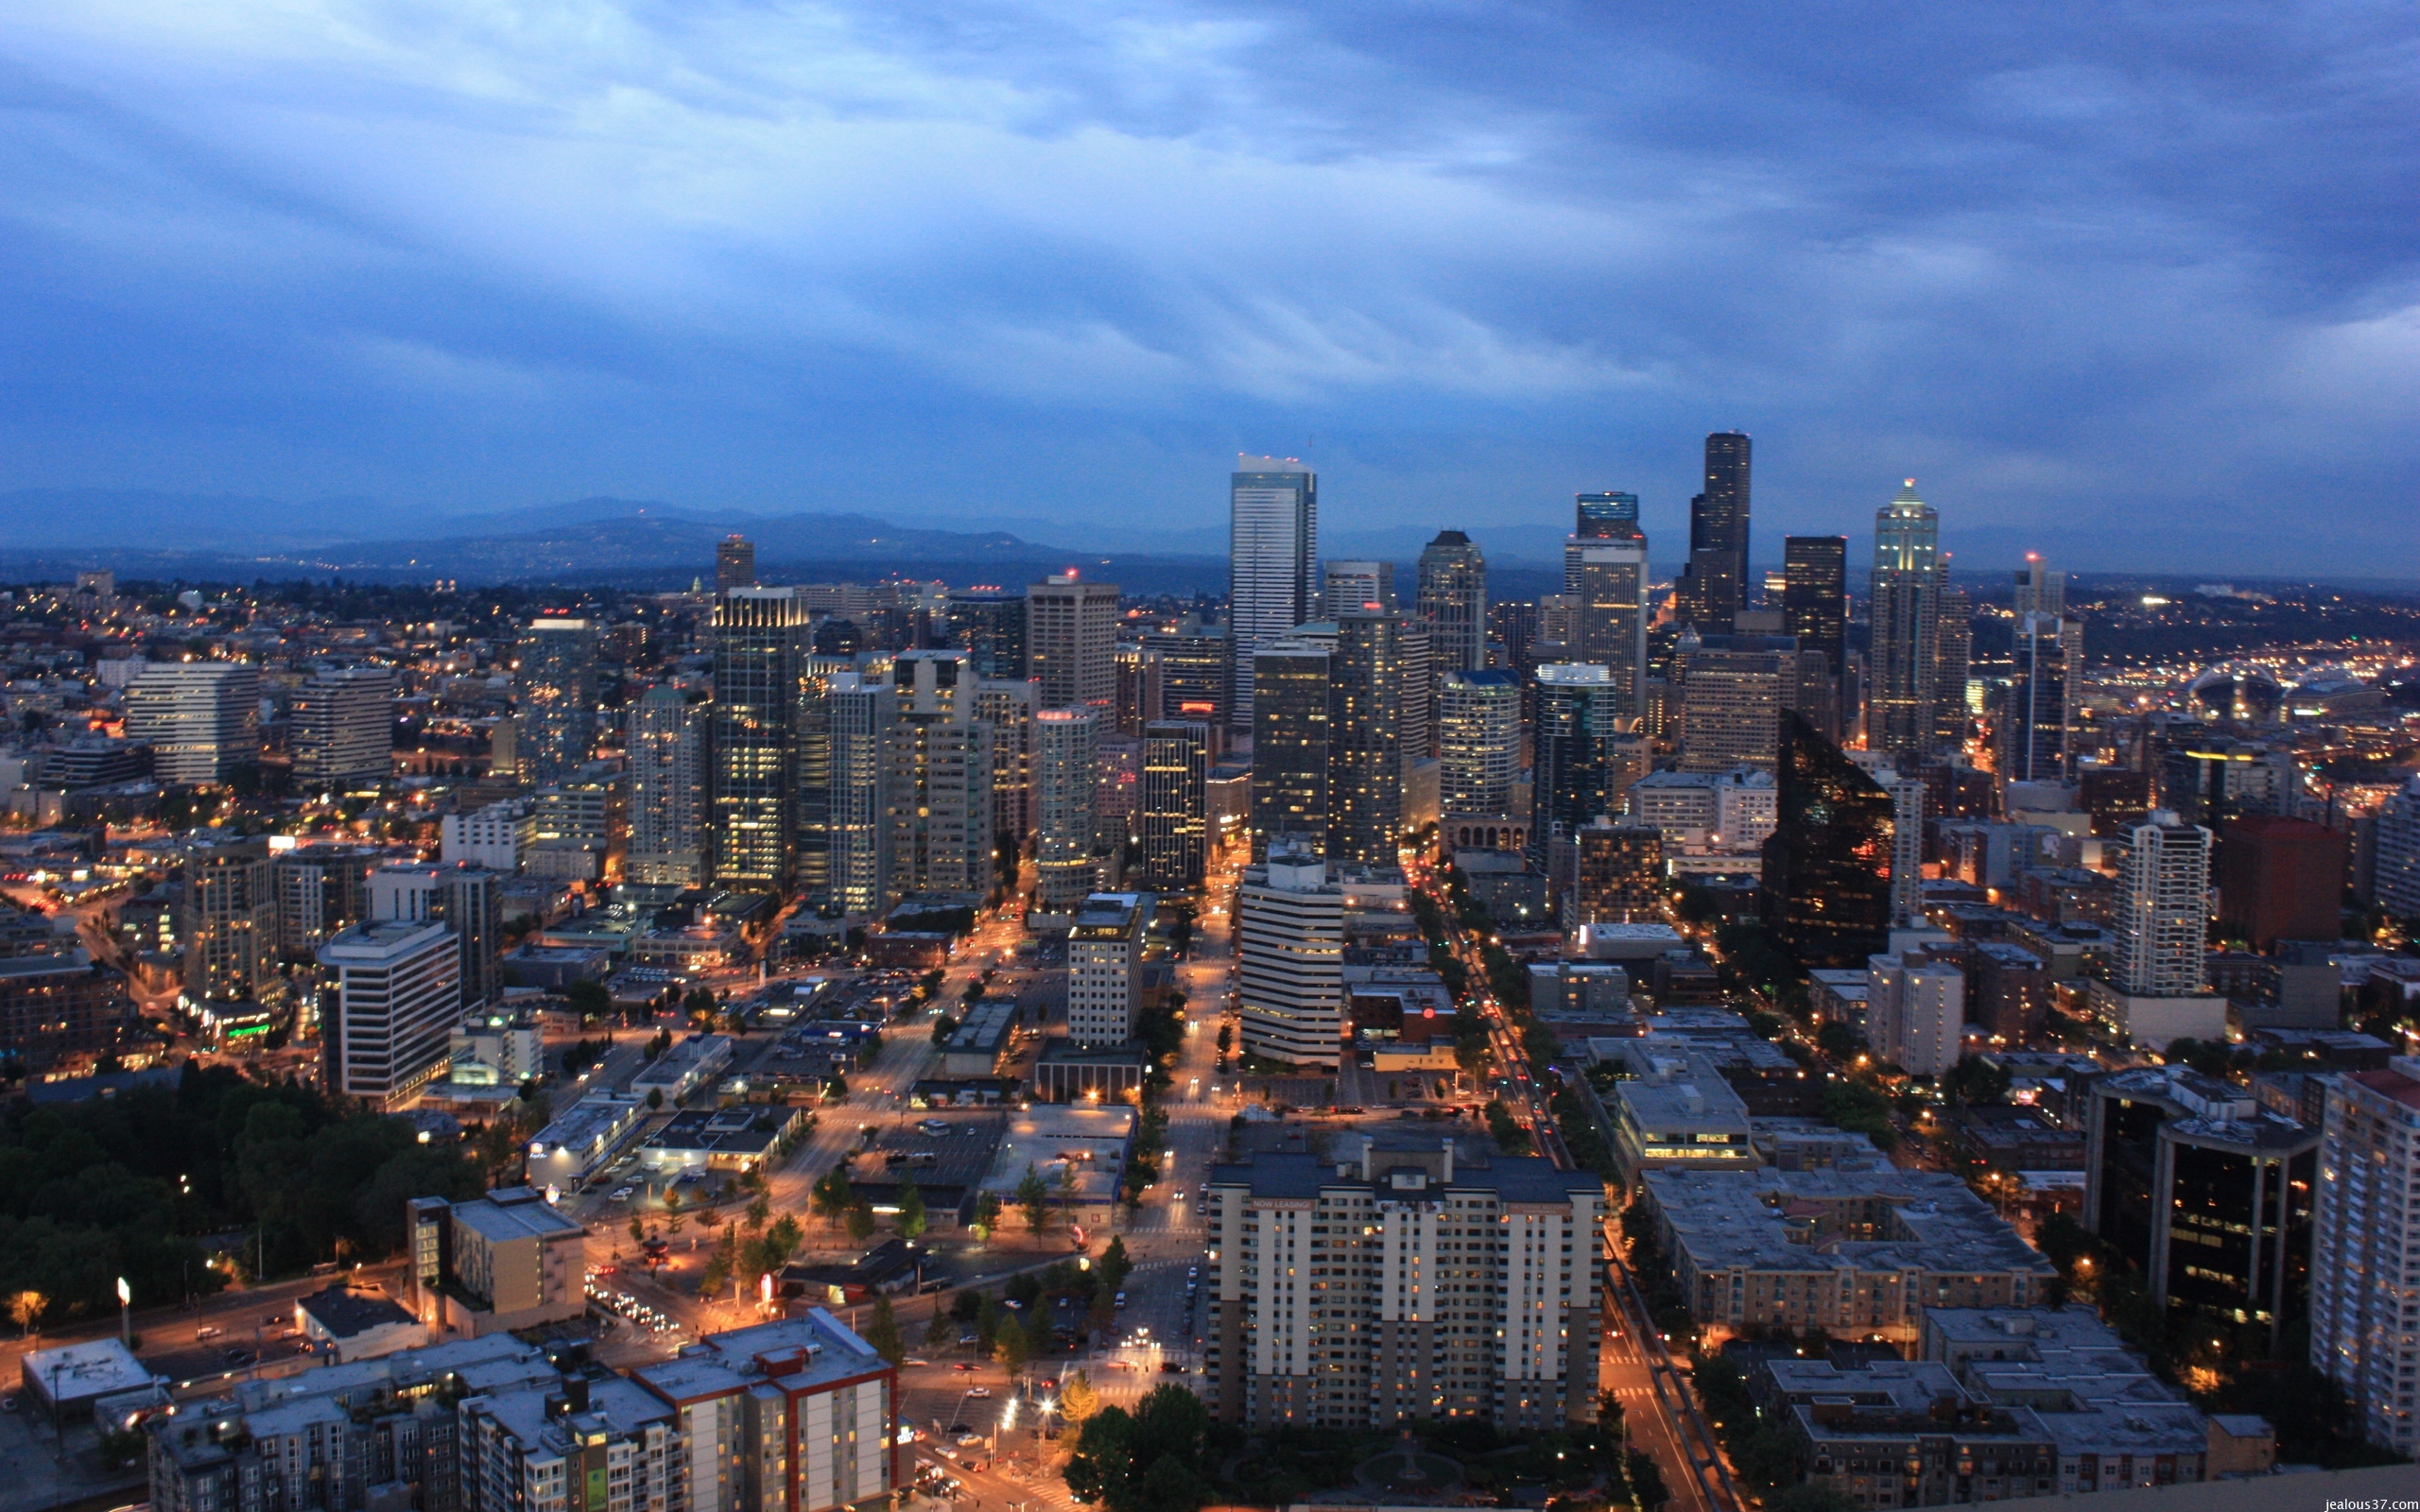 The Seattle skyline from the top of the Space Needle